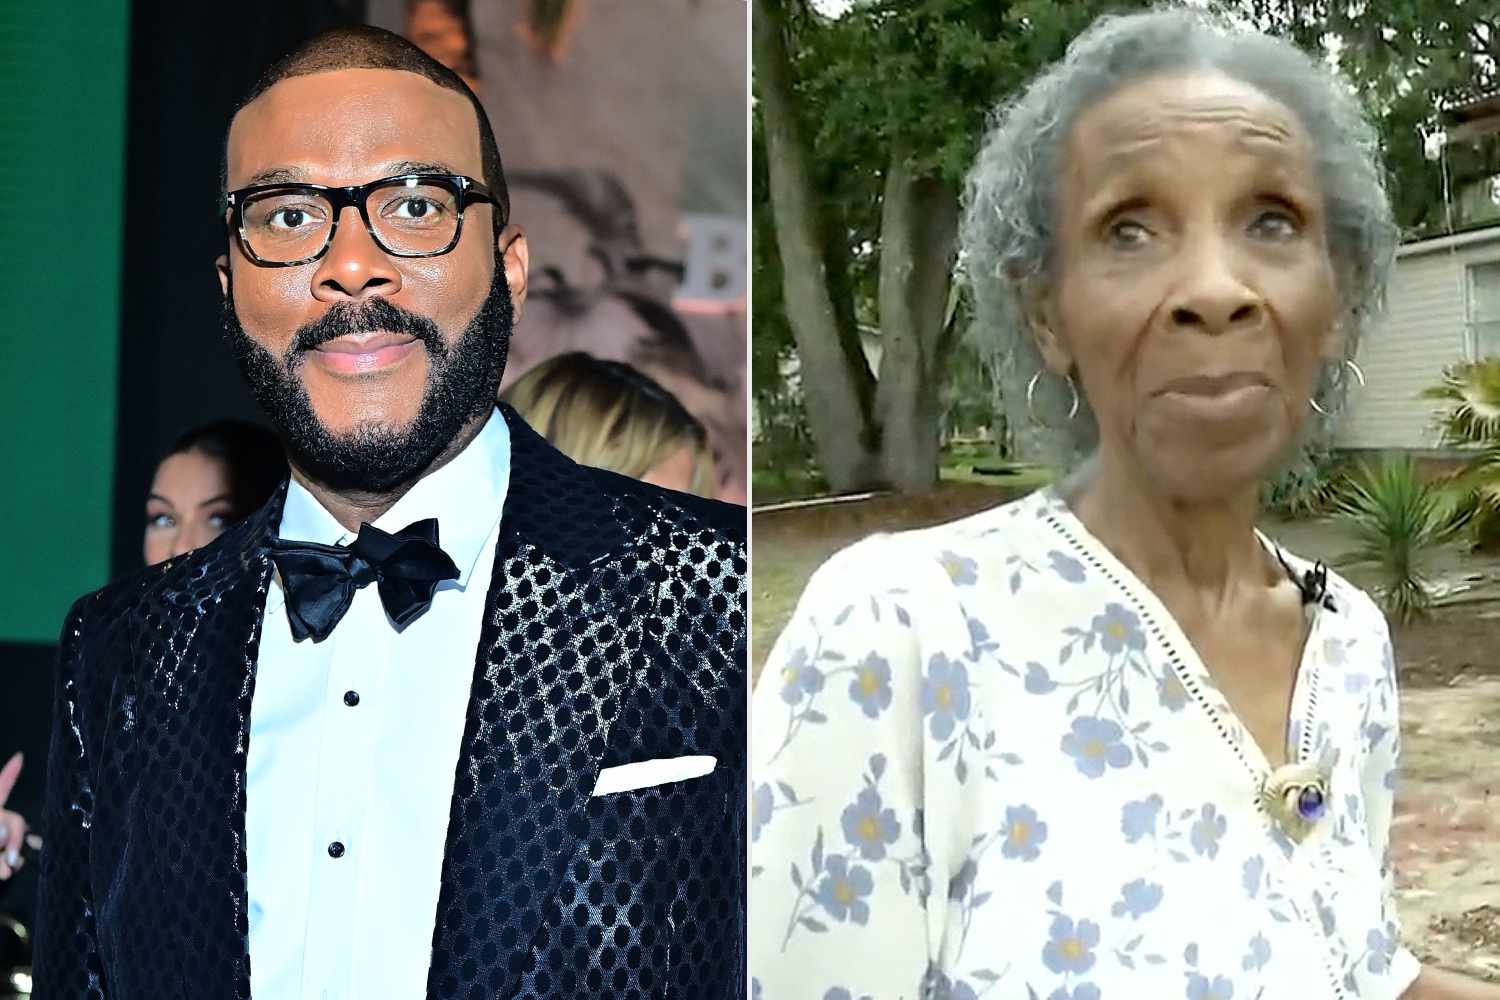 tyler-perry-comes-to-the-rescue-buys-house-for-93-year-old-woman-pushed-out-by-developers